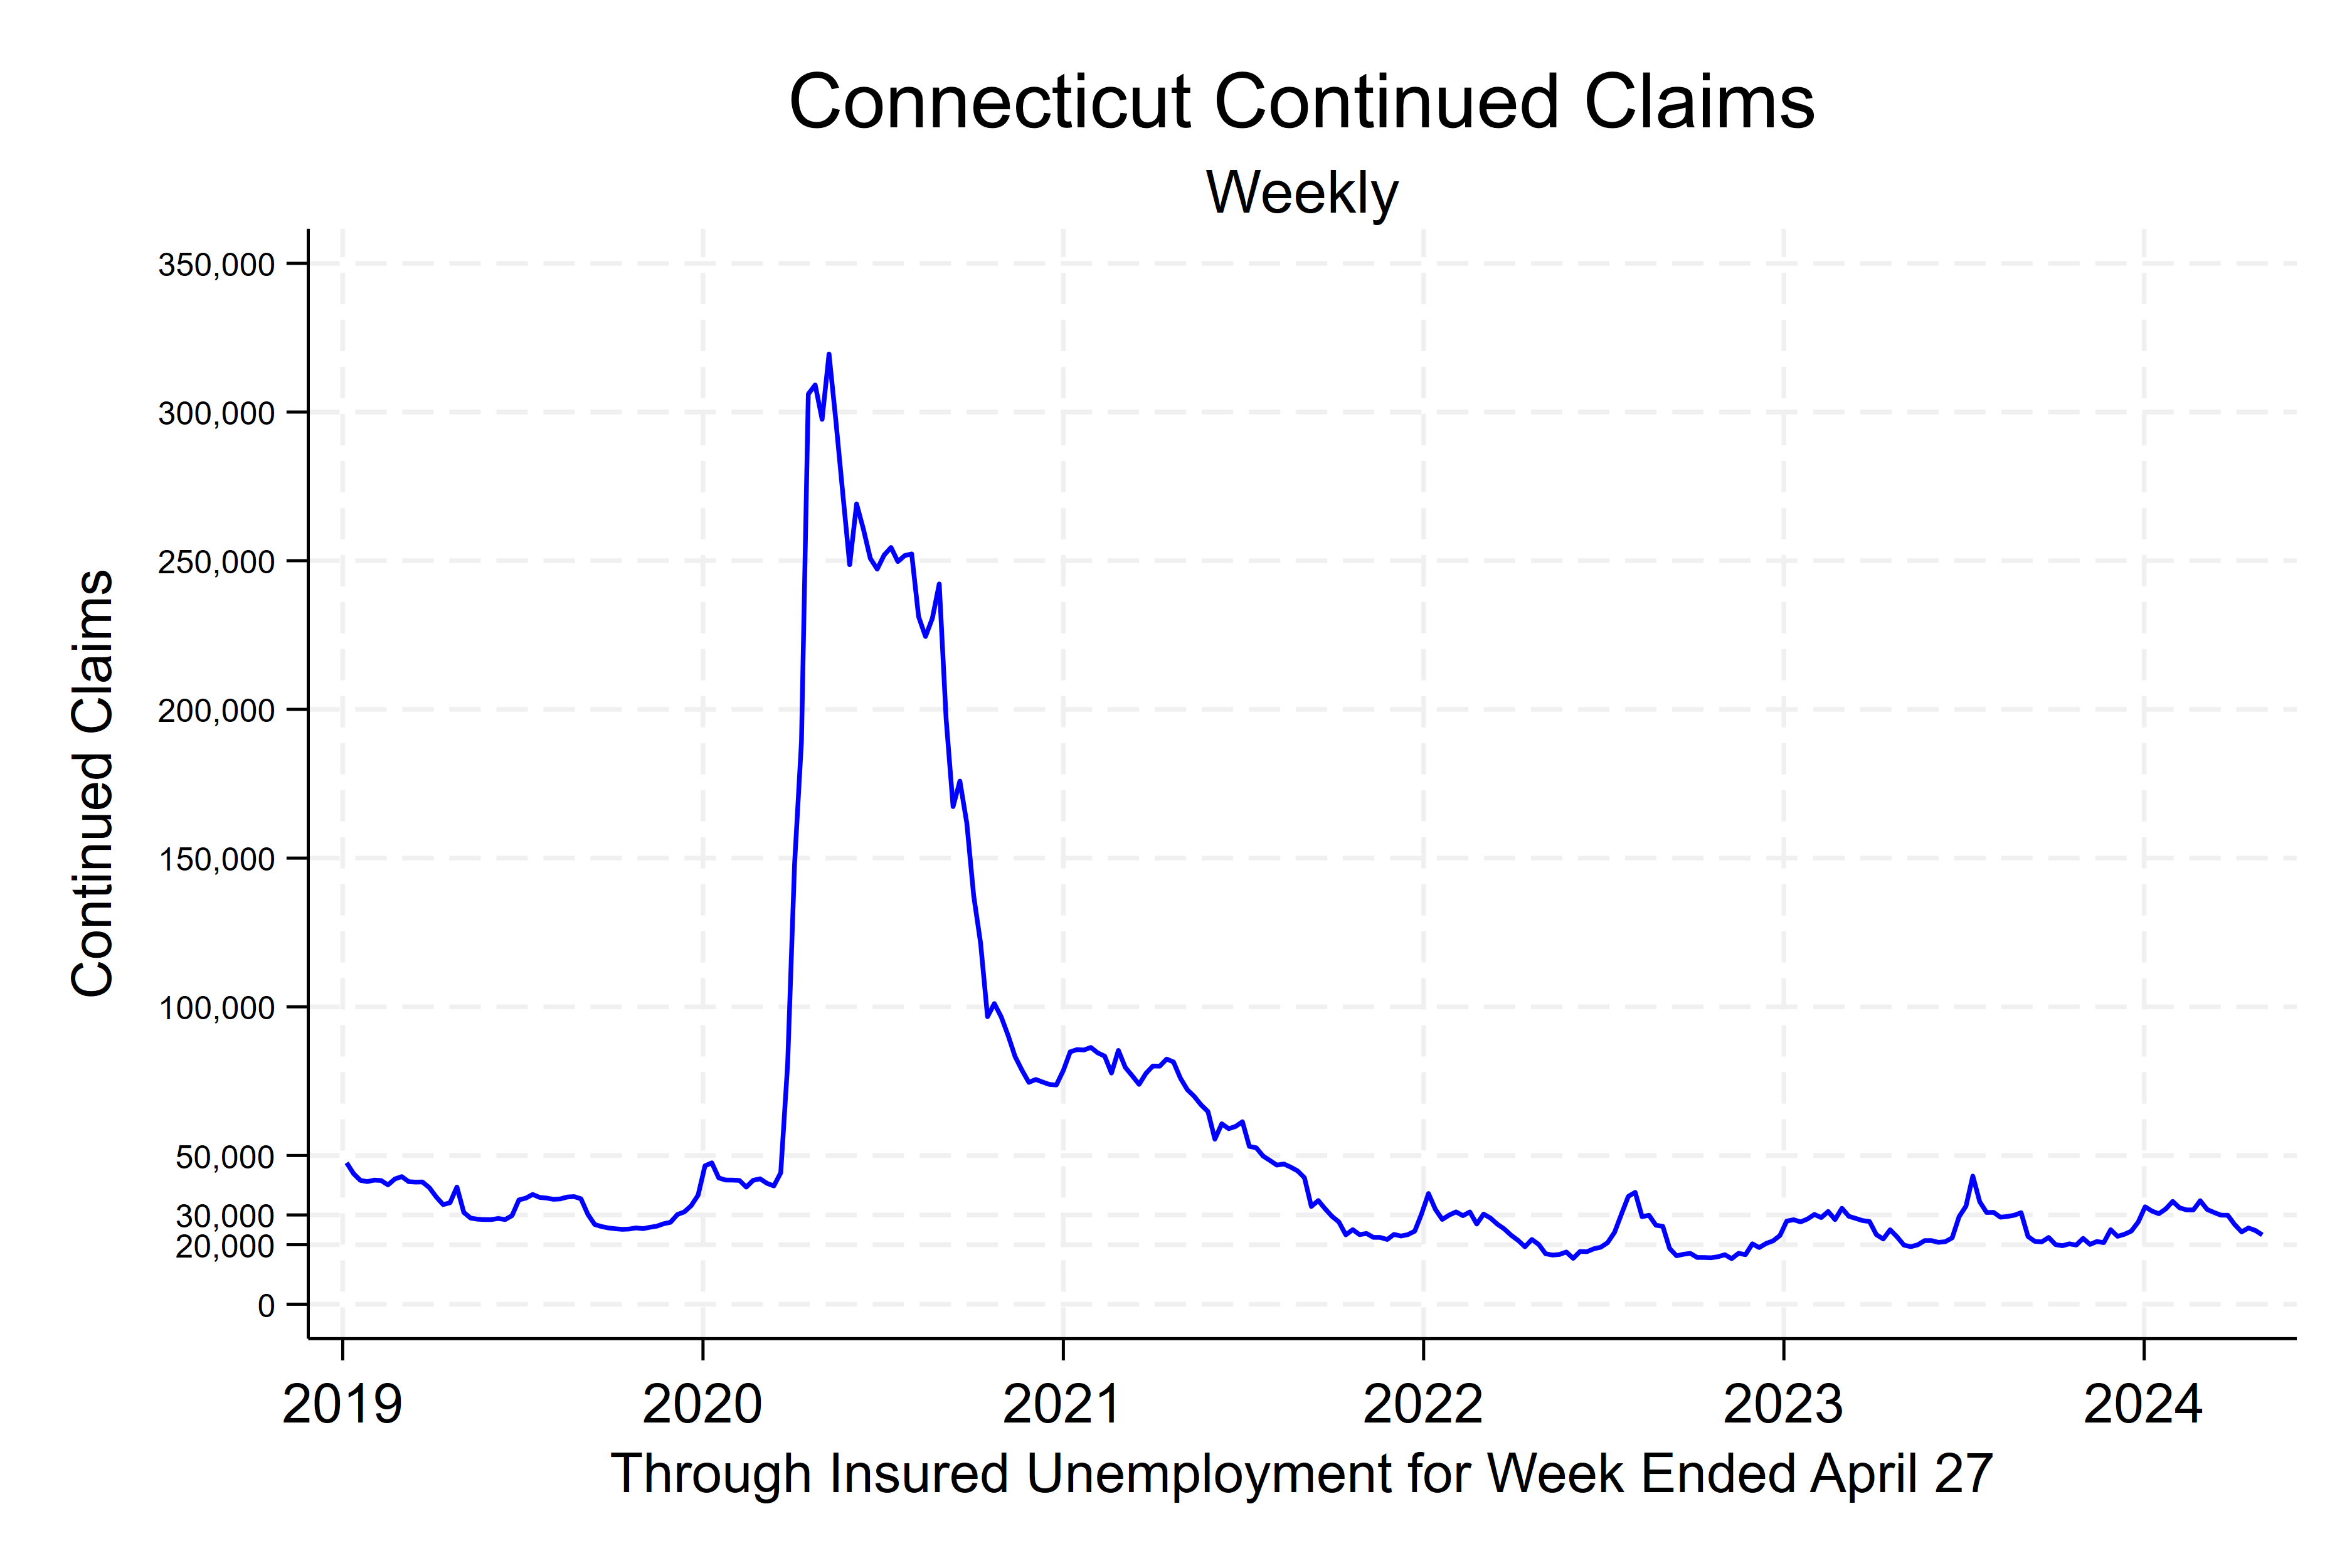 Continued Initial Claims increase - November 18, 2022